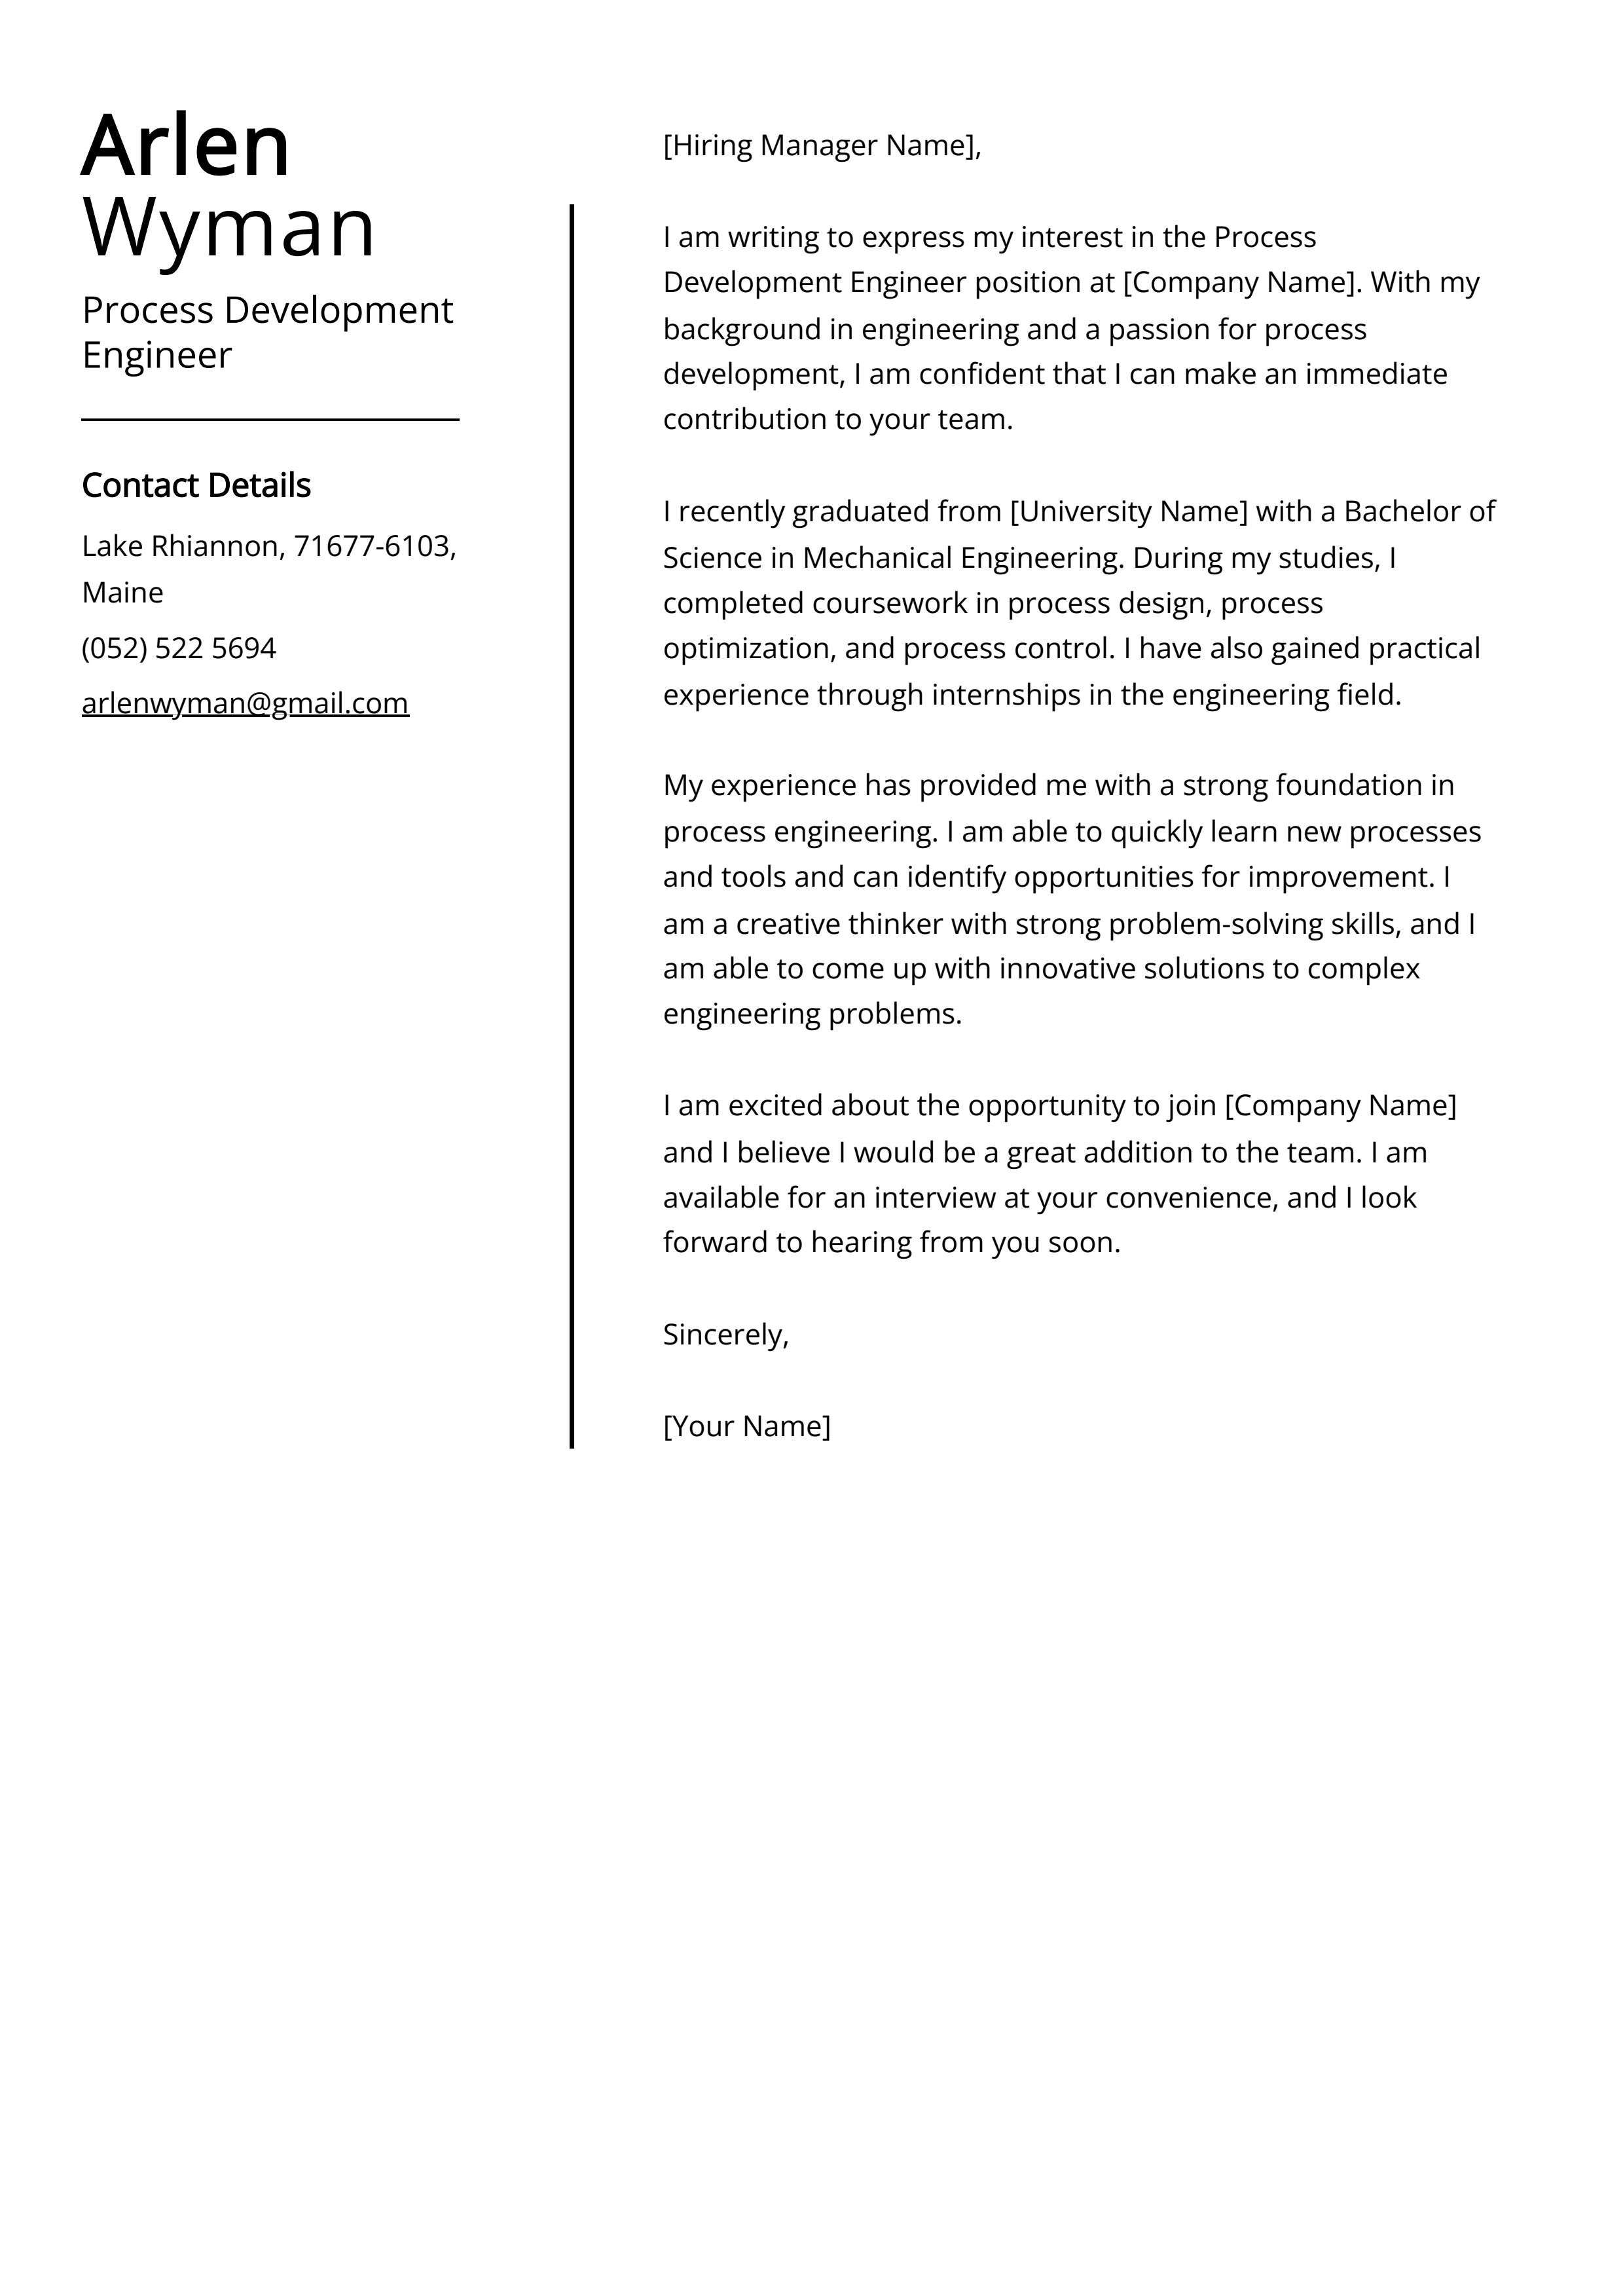 Process Development Engineer Cover Letter Example